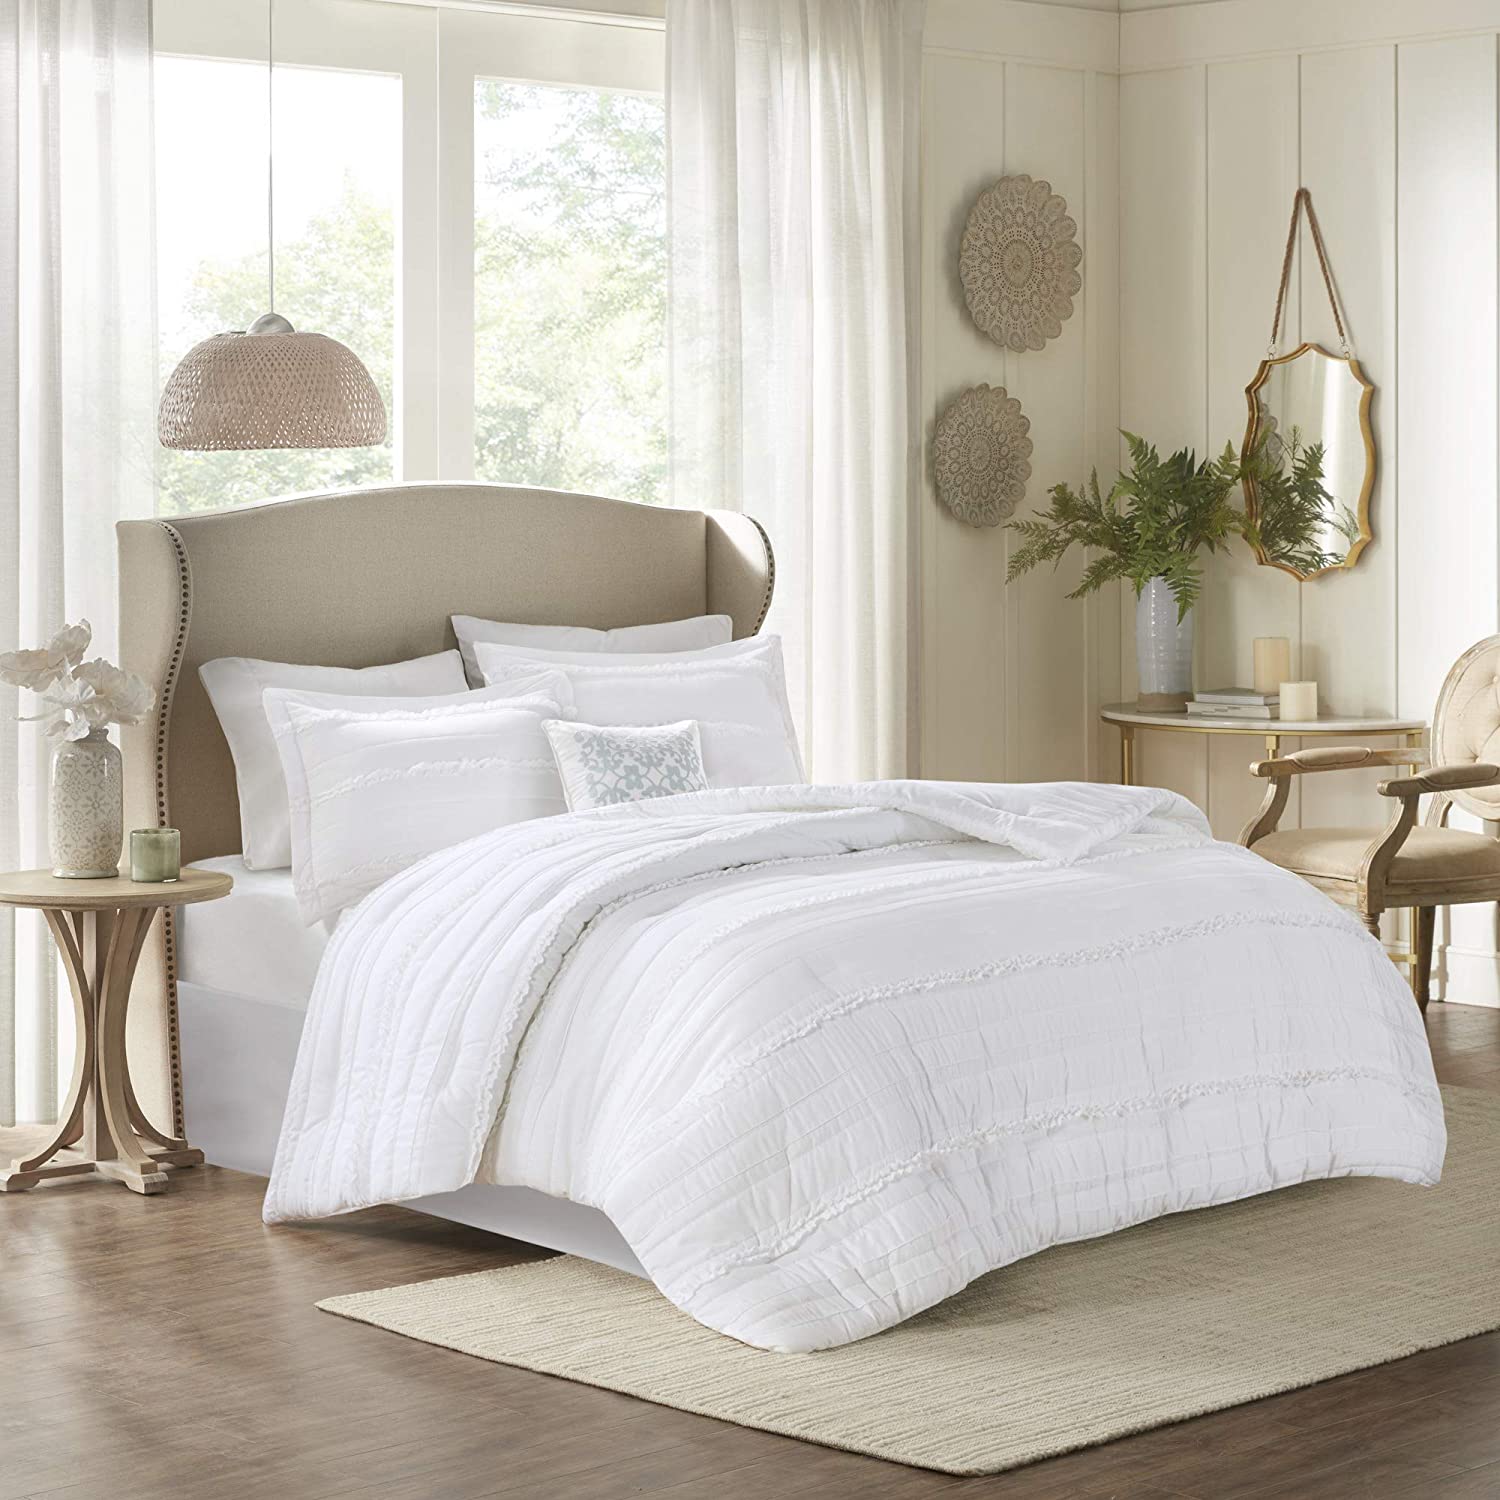 Madison Luxury Home’s Bed Sheet Sets Newest Product – Sapodilla Gardens